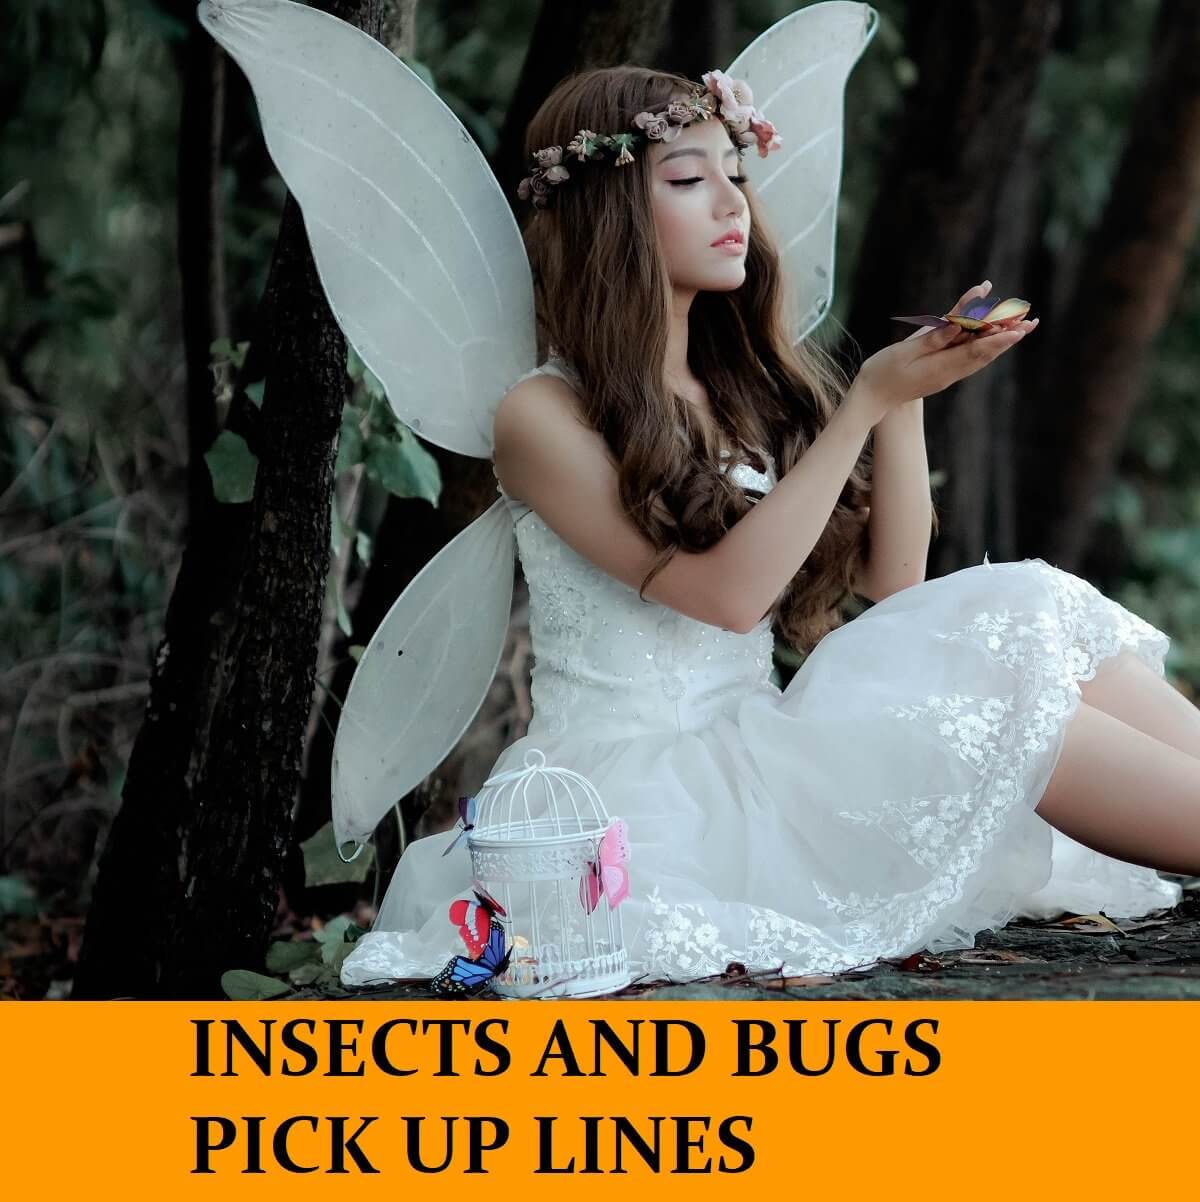 Pick Up Lines Based on Insects and Bugs